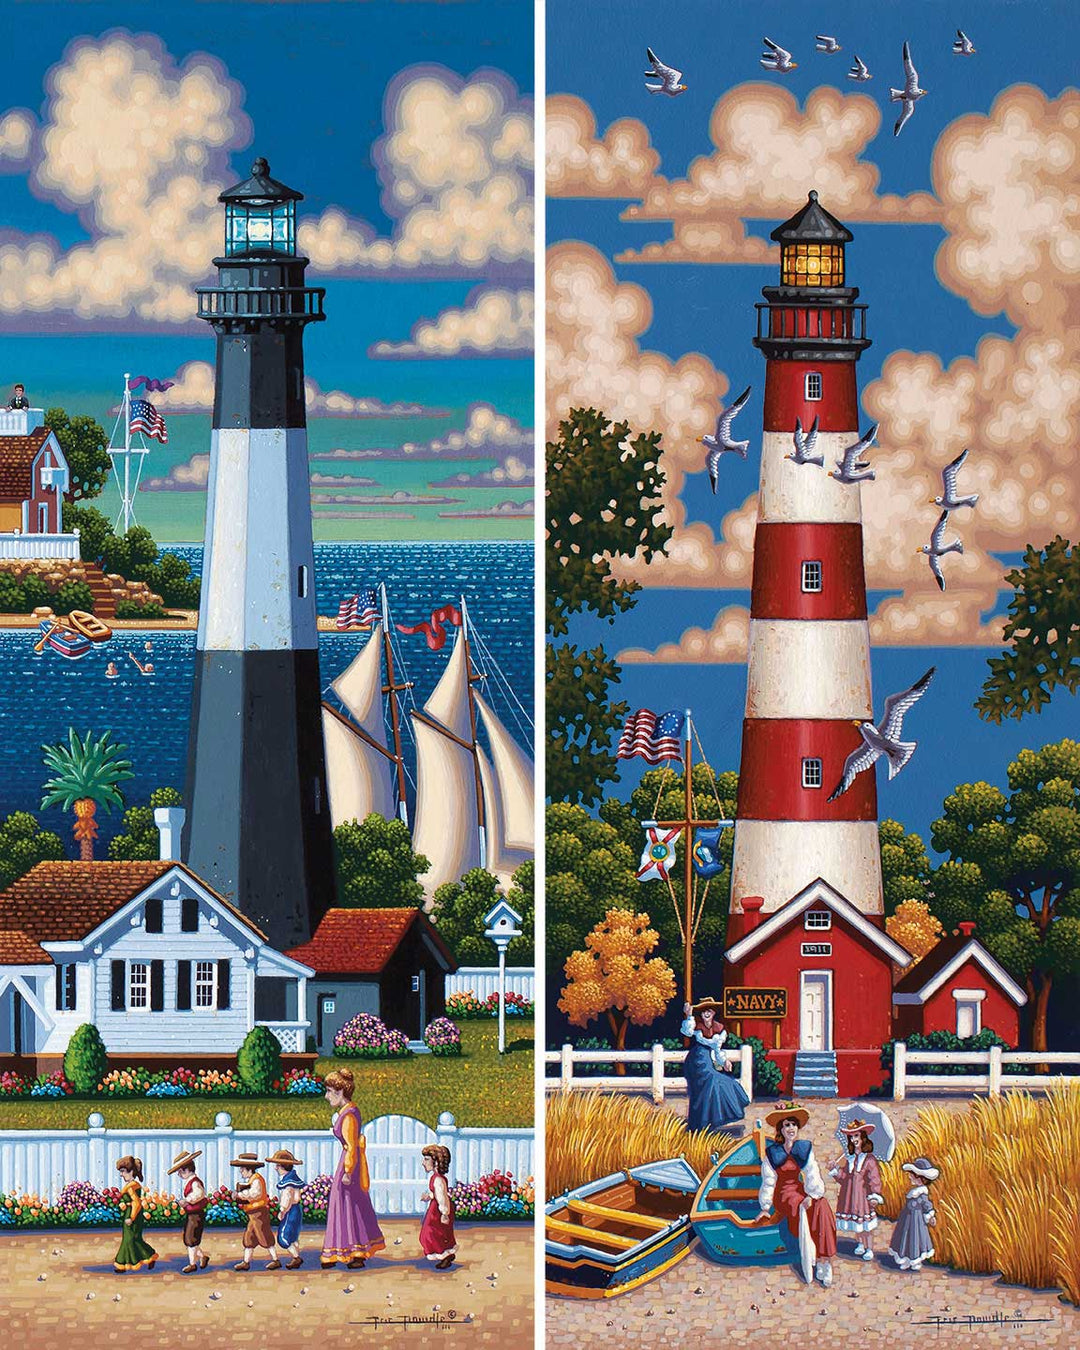 Lighthouses South - 500 Piece